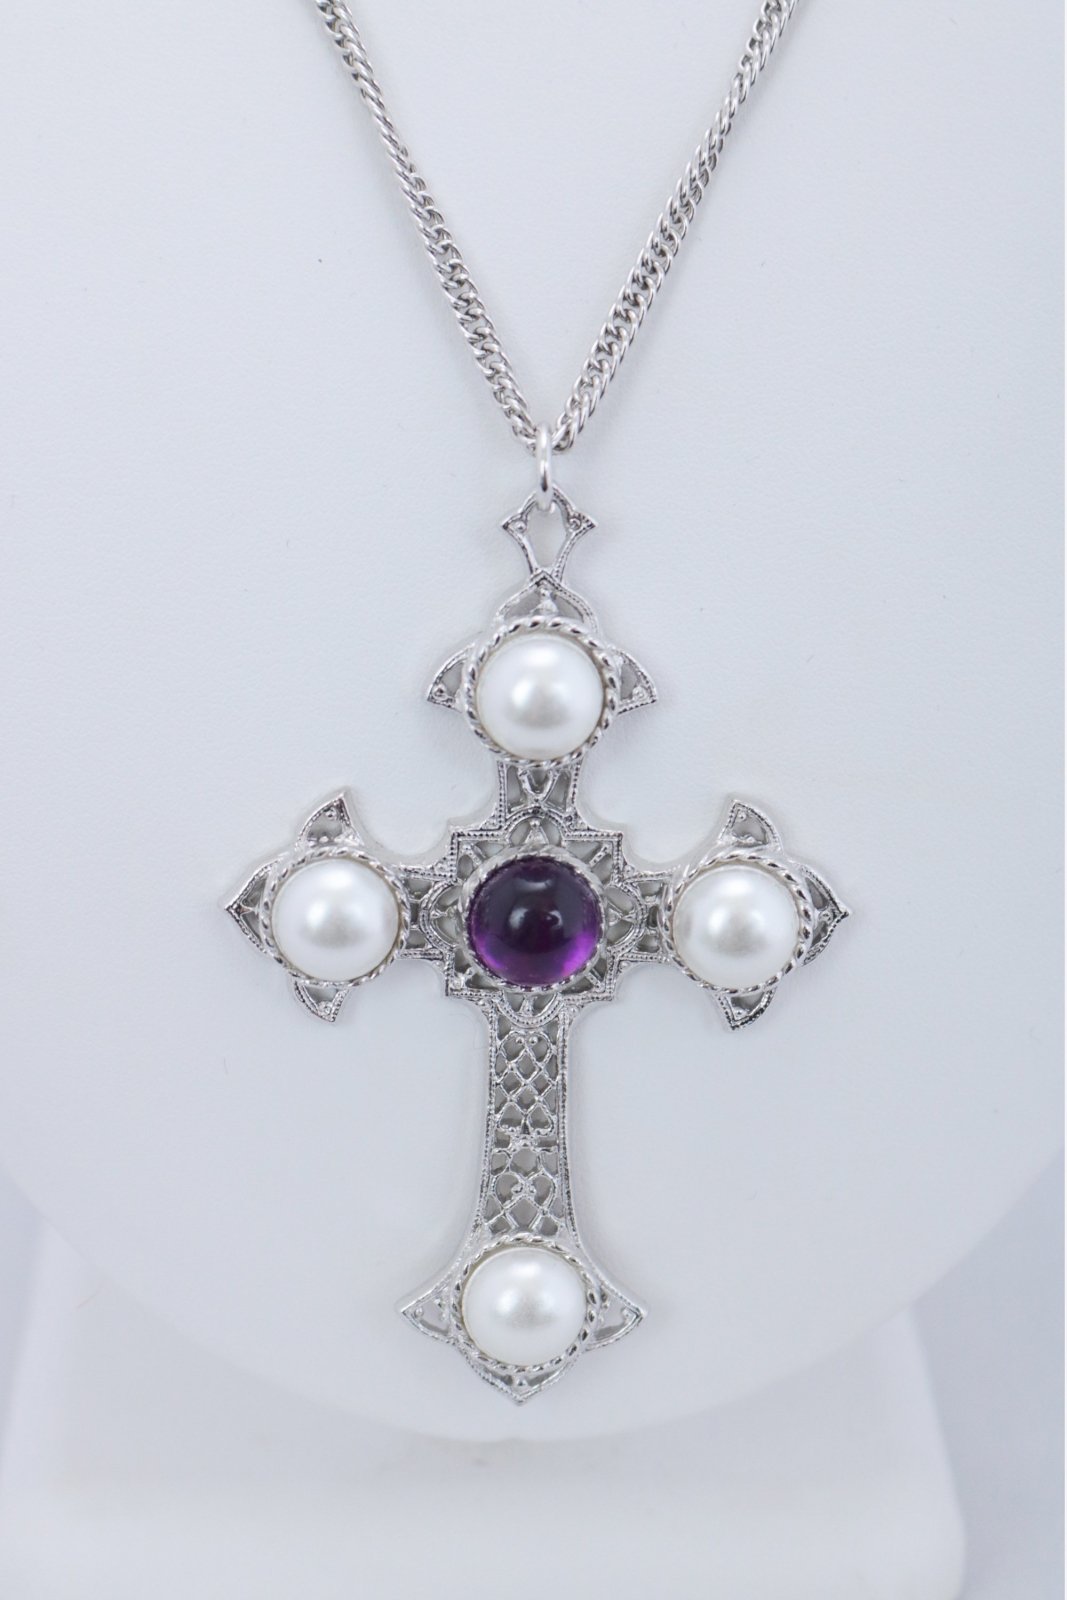 1970s Sarah Coventry Crusader Cross Necklace - Floria Vintage